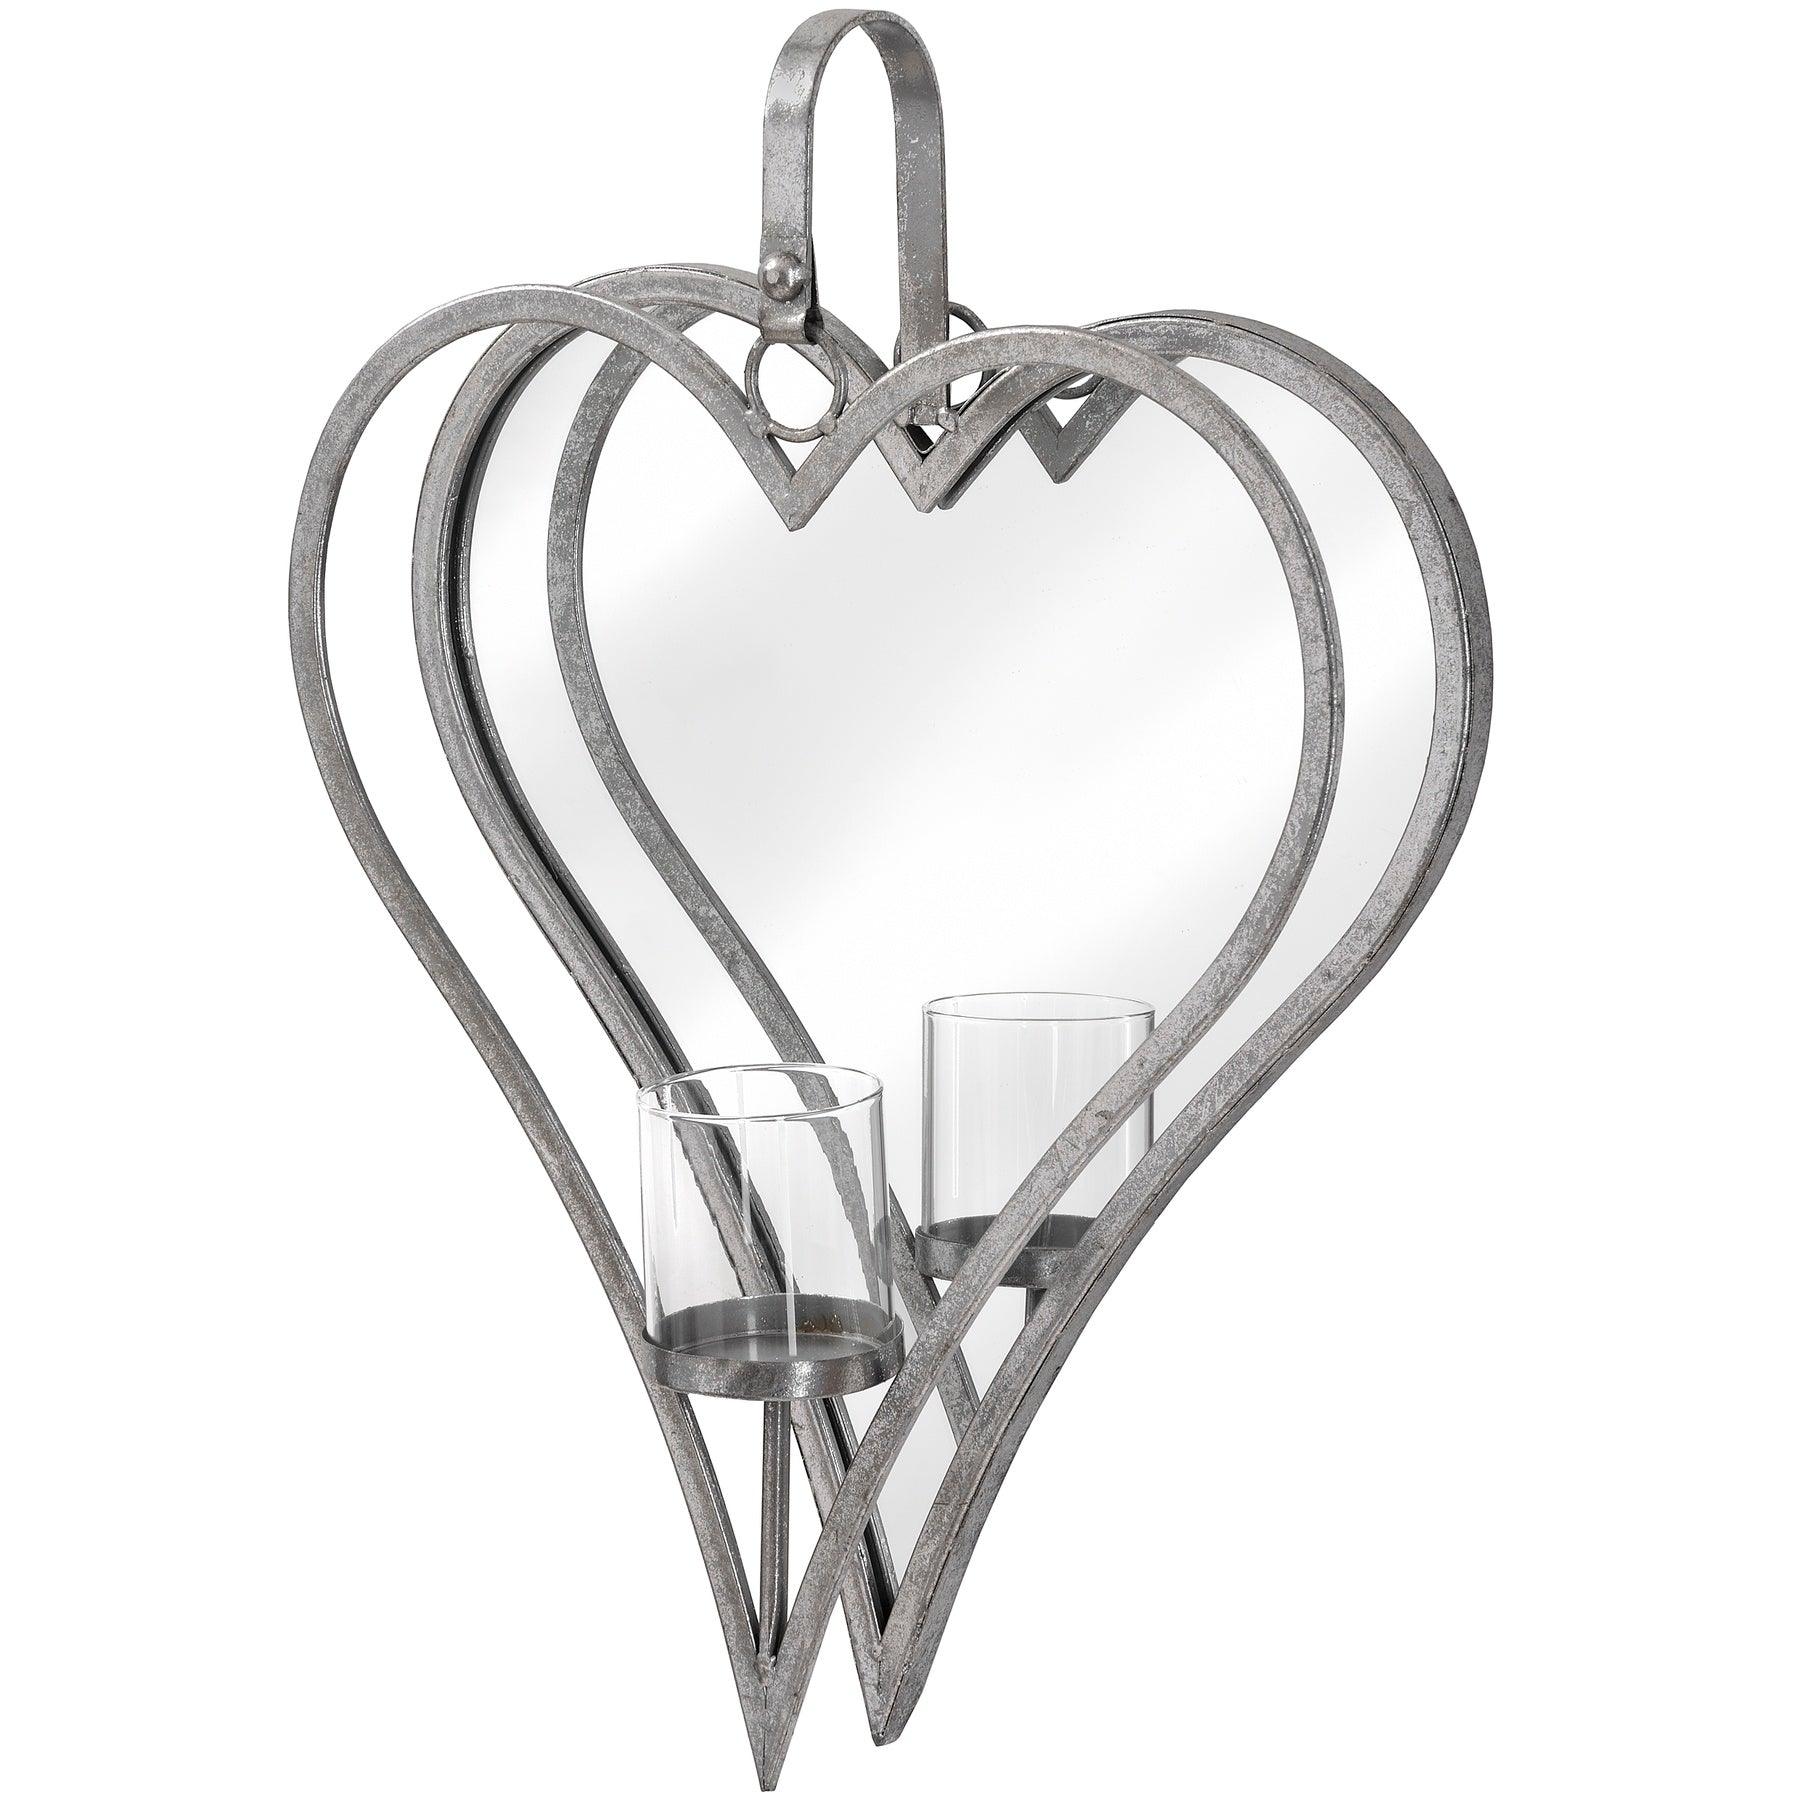 View Large Antique Silver Mirrored Heart Candle Holder information